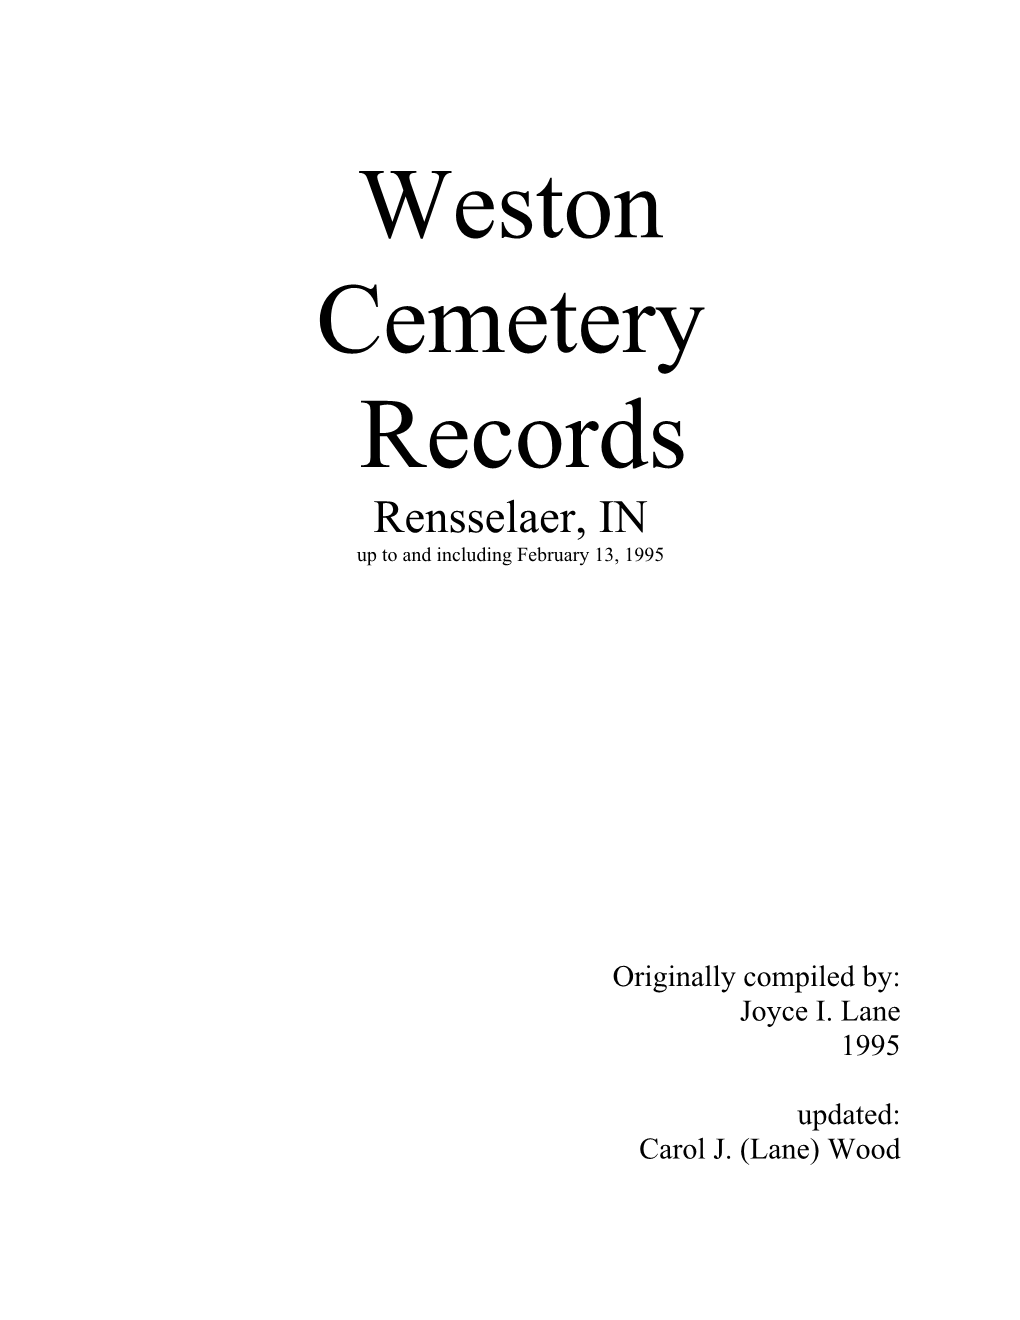 Weston Cemetery Records Rensselaer, in up to and Including February 13, 1995